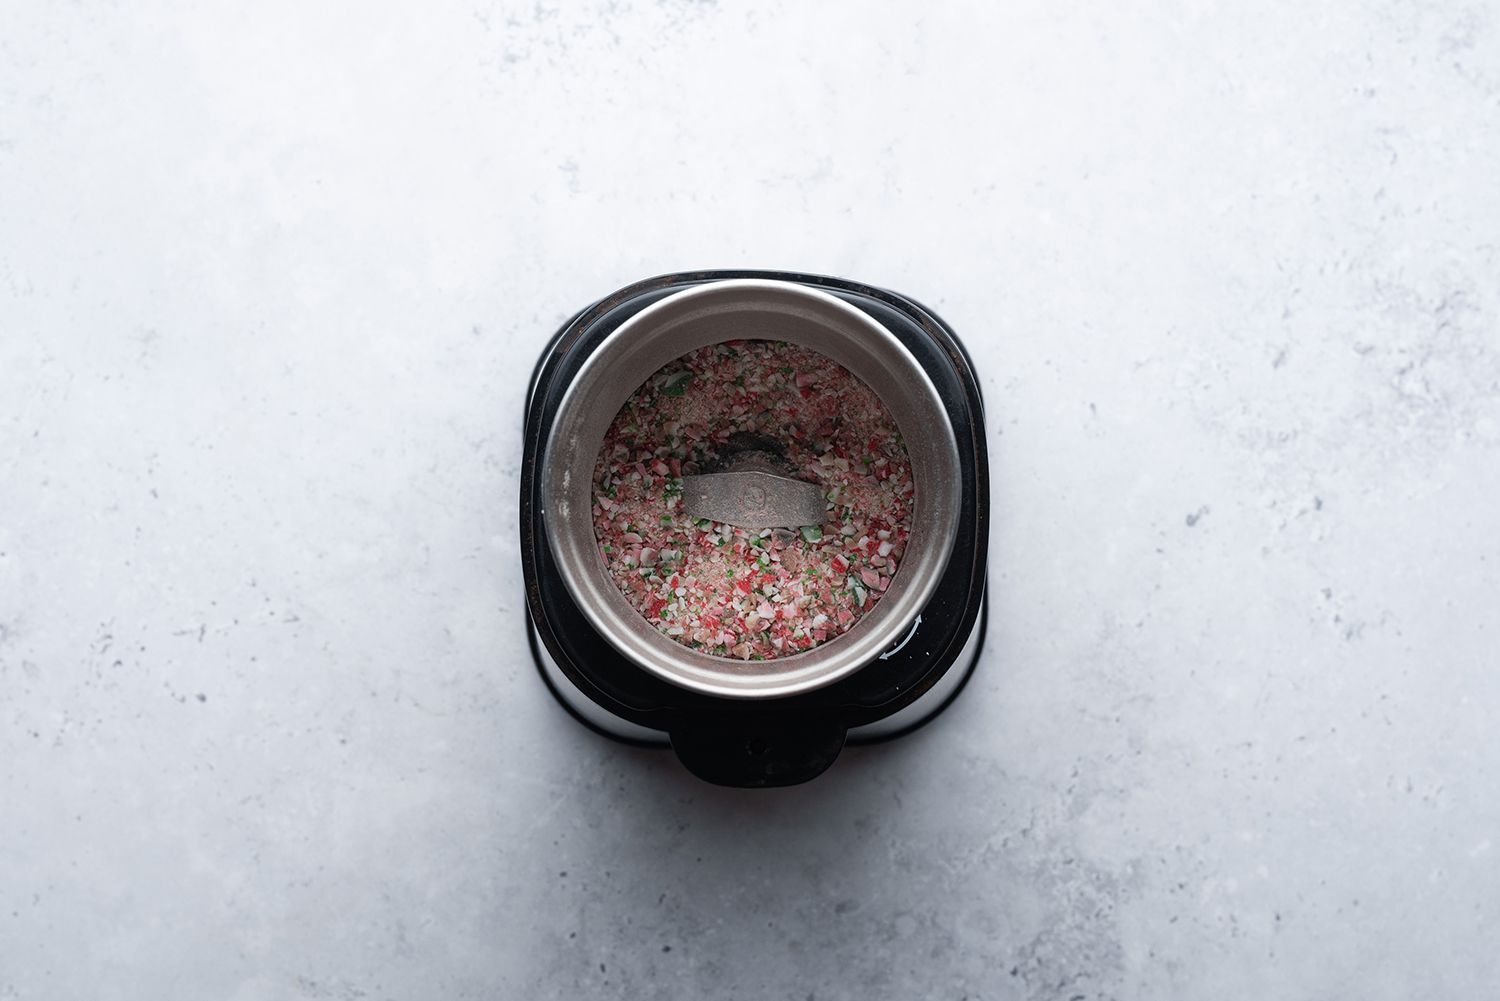 Candy cane in a coffee grinder 